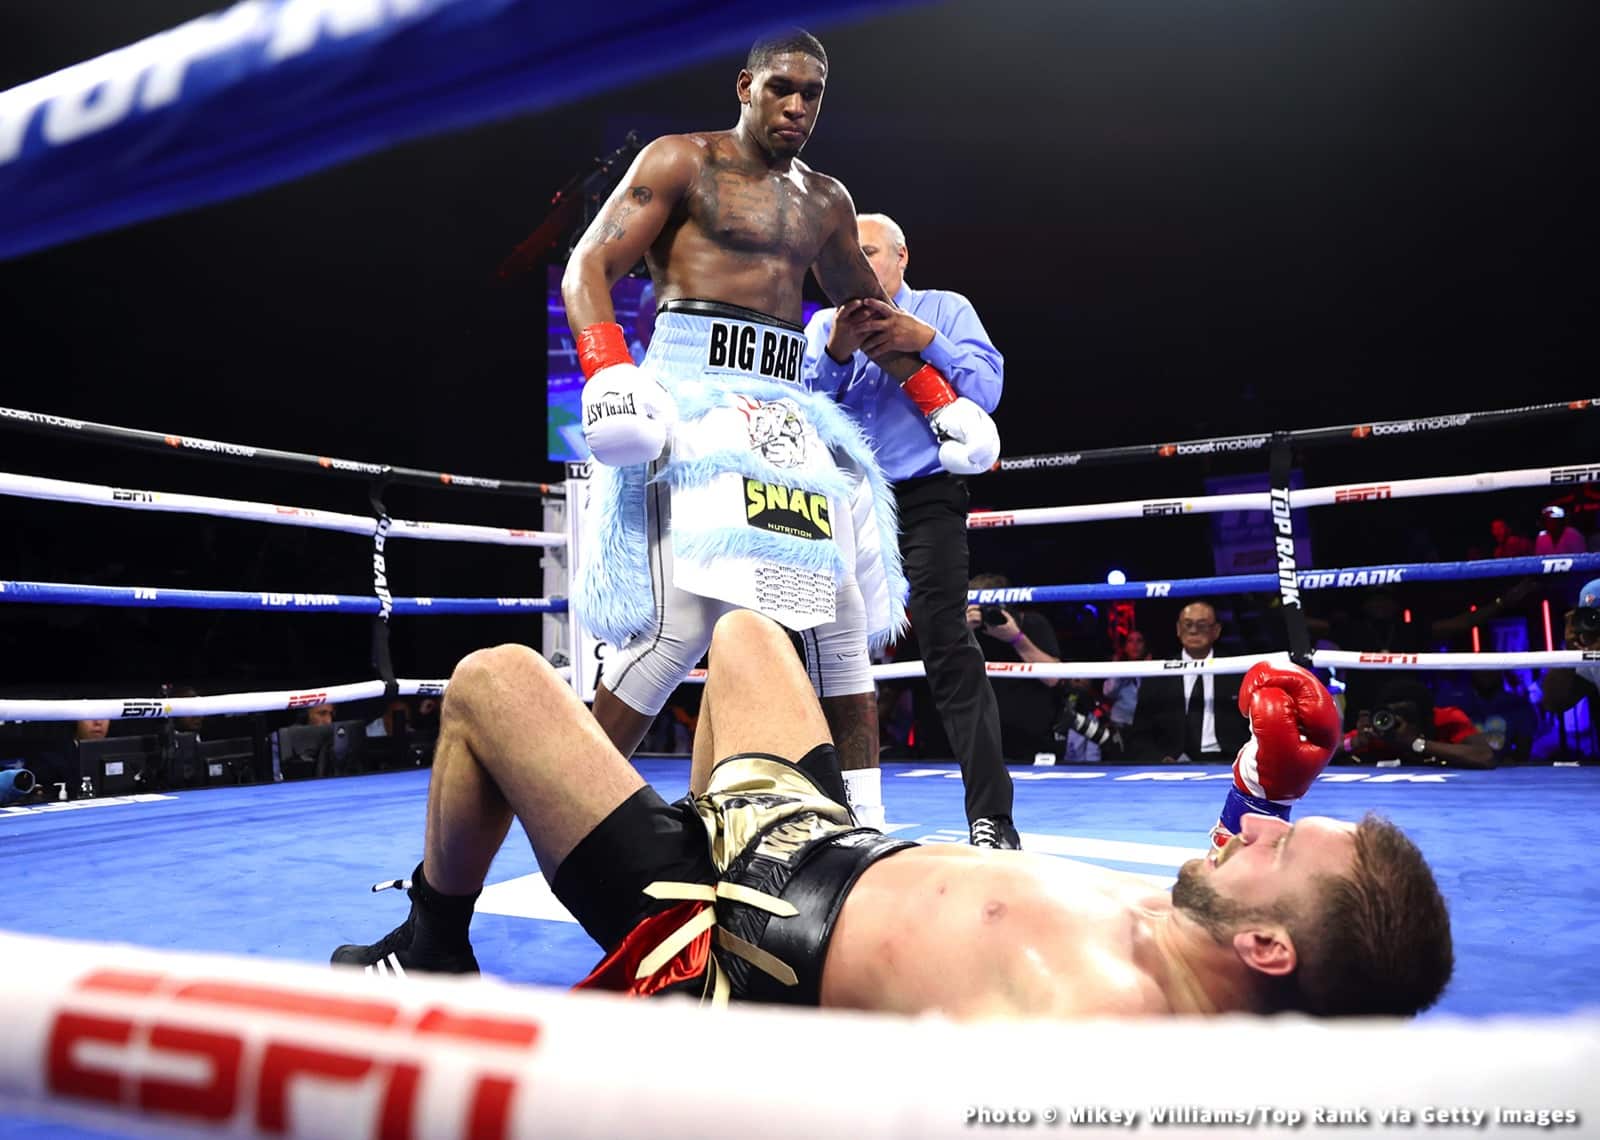 Image: Results / Photos: Jared Anderson, Richard Torrez Jr., Efe Ajagba With KO Wins